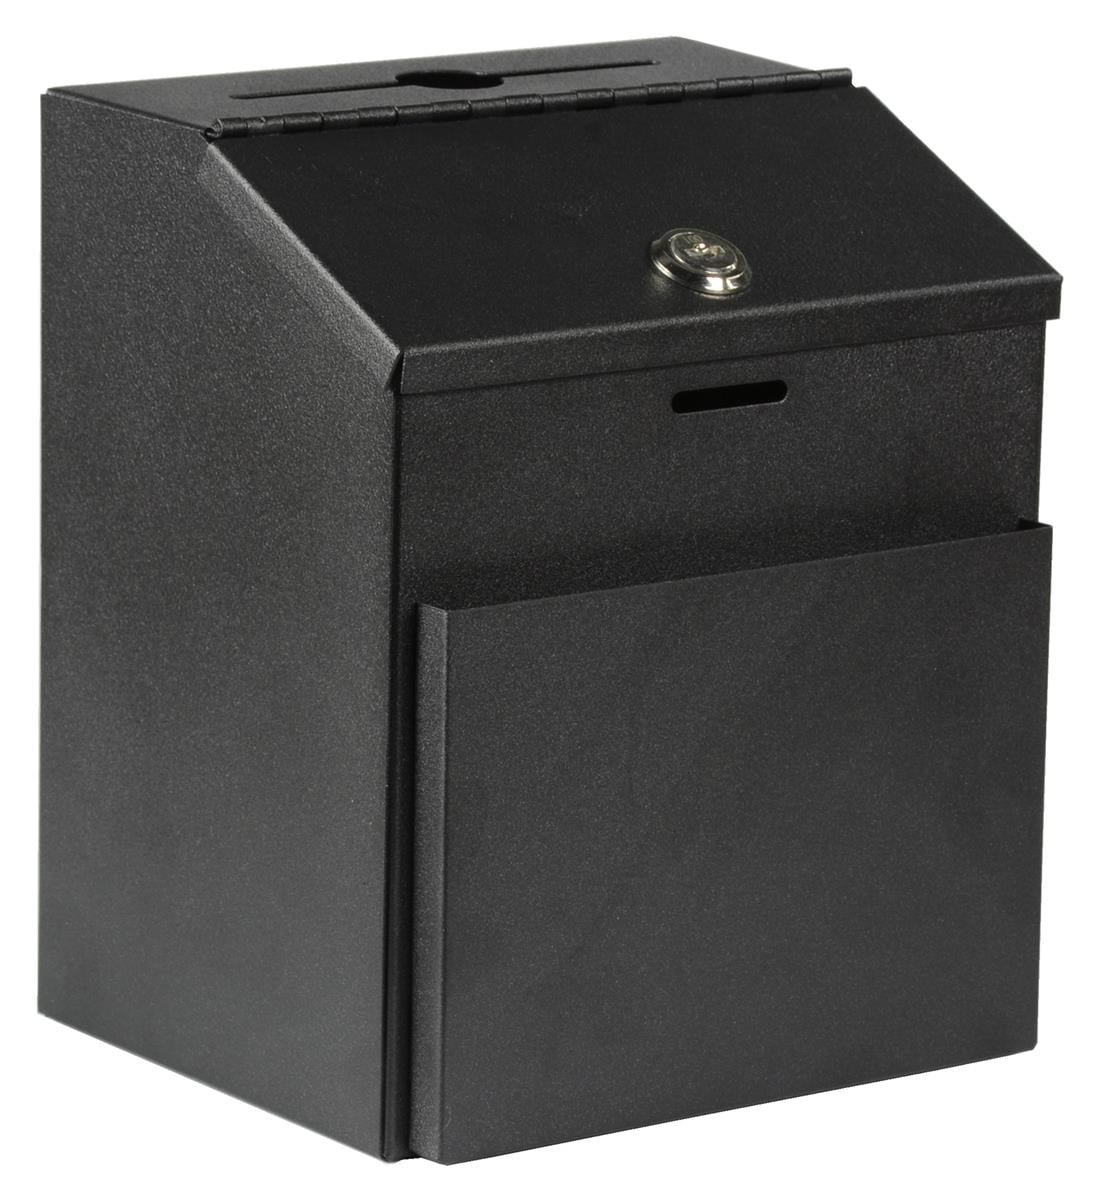 Suggestion Box with Lock Wall Mounted Steel Ballot Box with Lock Donation Box with Lock and Slot Key Drop Box Collection Lock Box with Key 8.4 x 7.1 x 5.9 Inches Black 